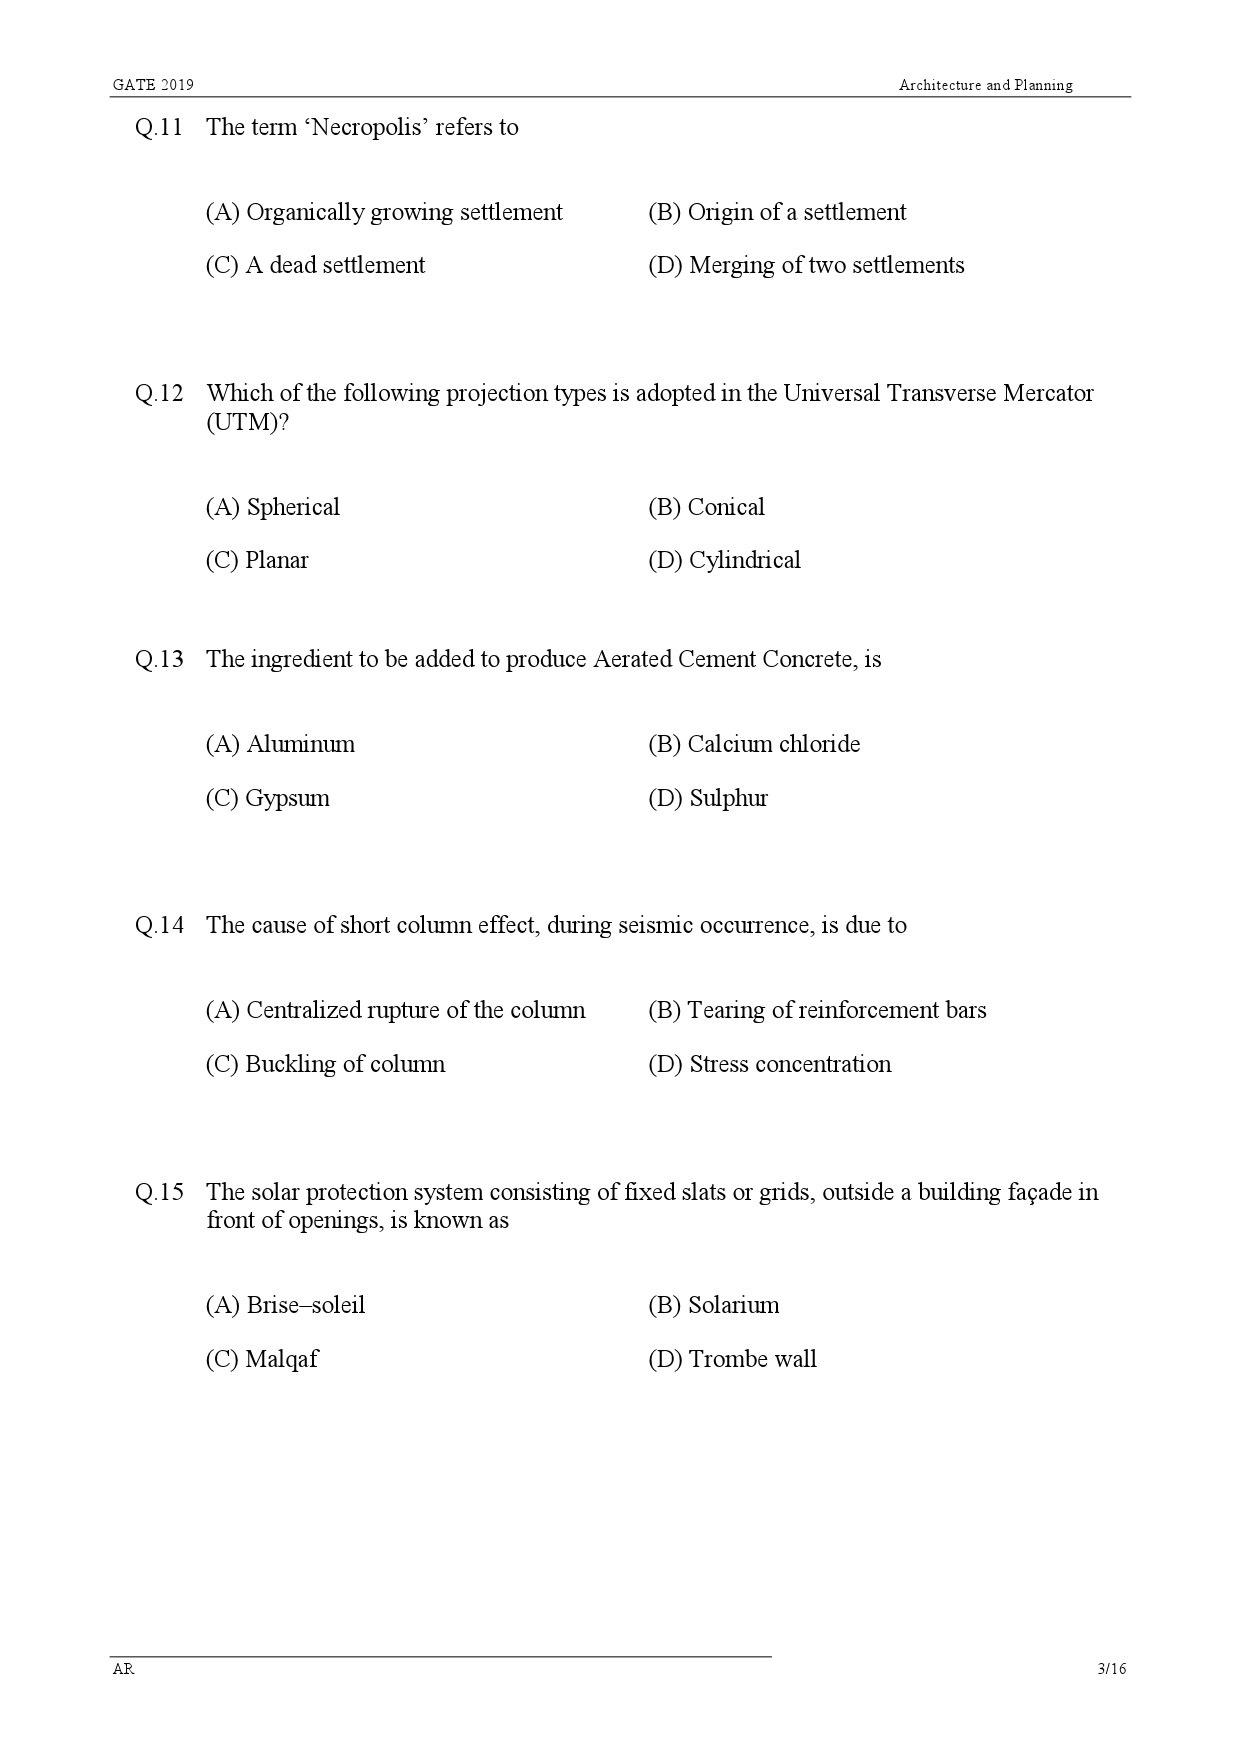 GATE Exam Question Paper 2019 Architecture and Planning 6